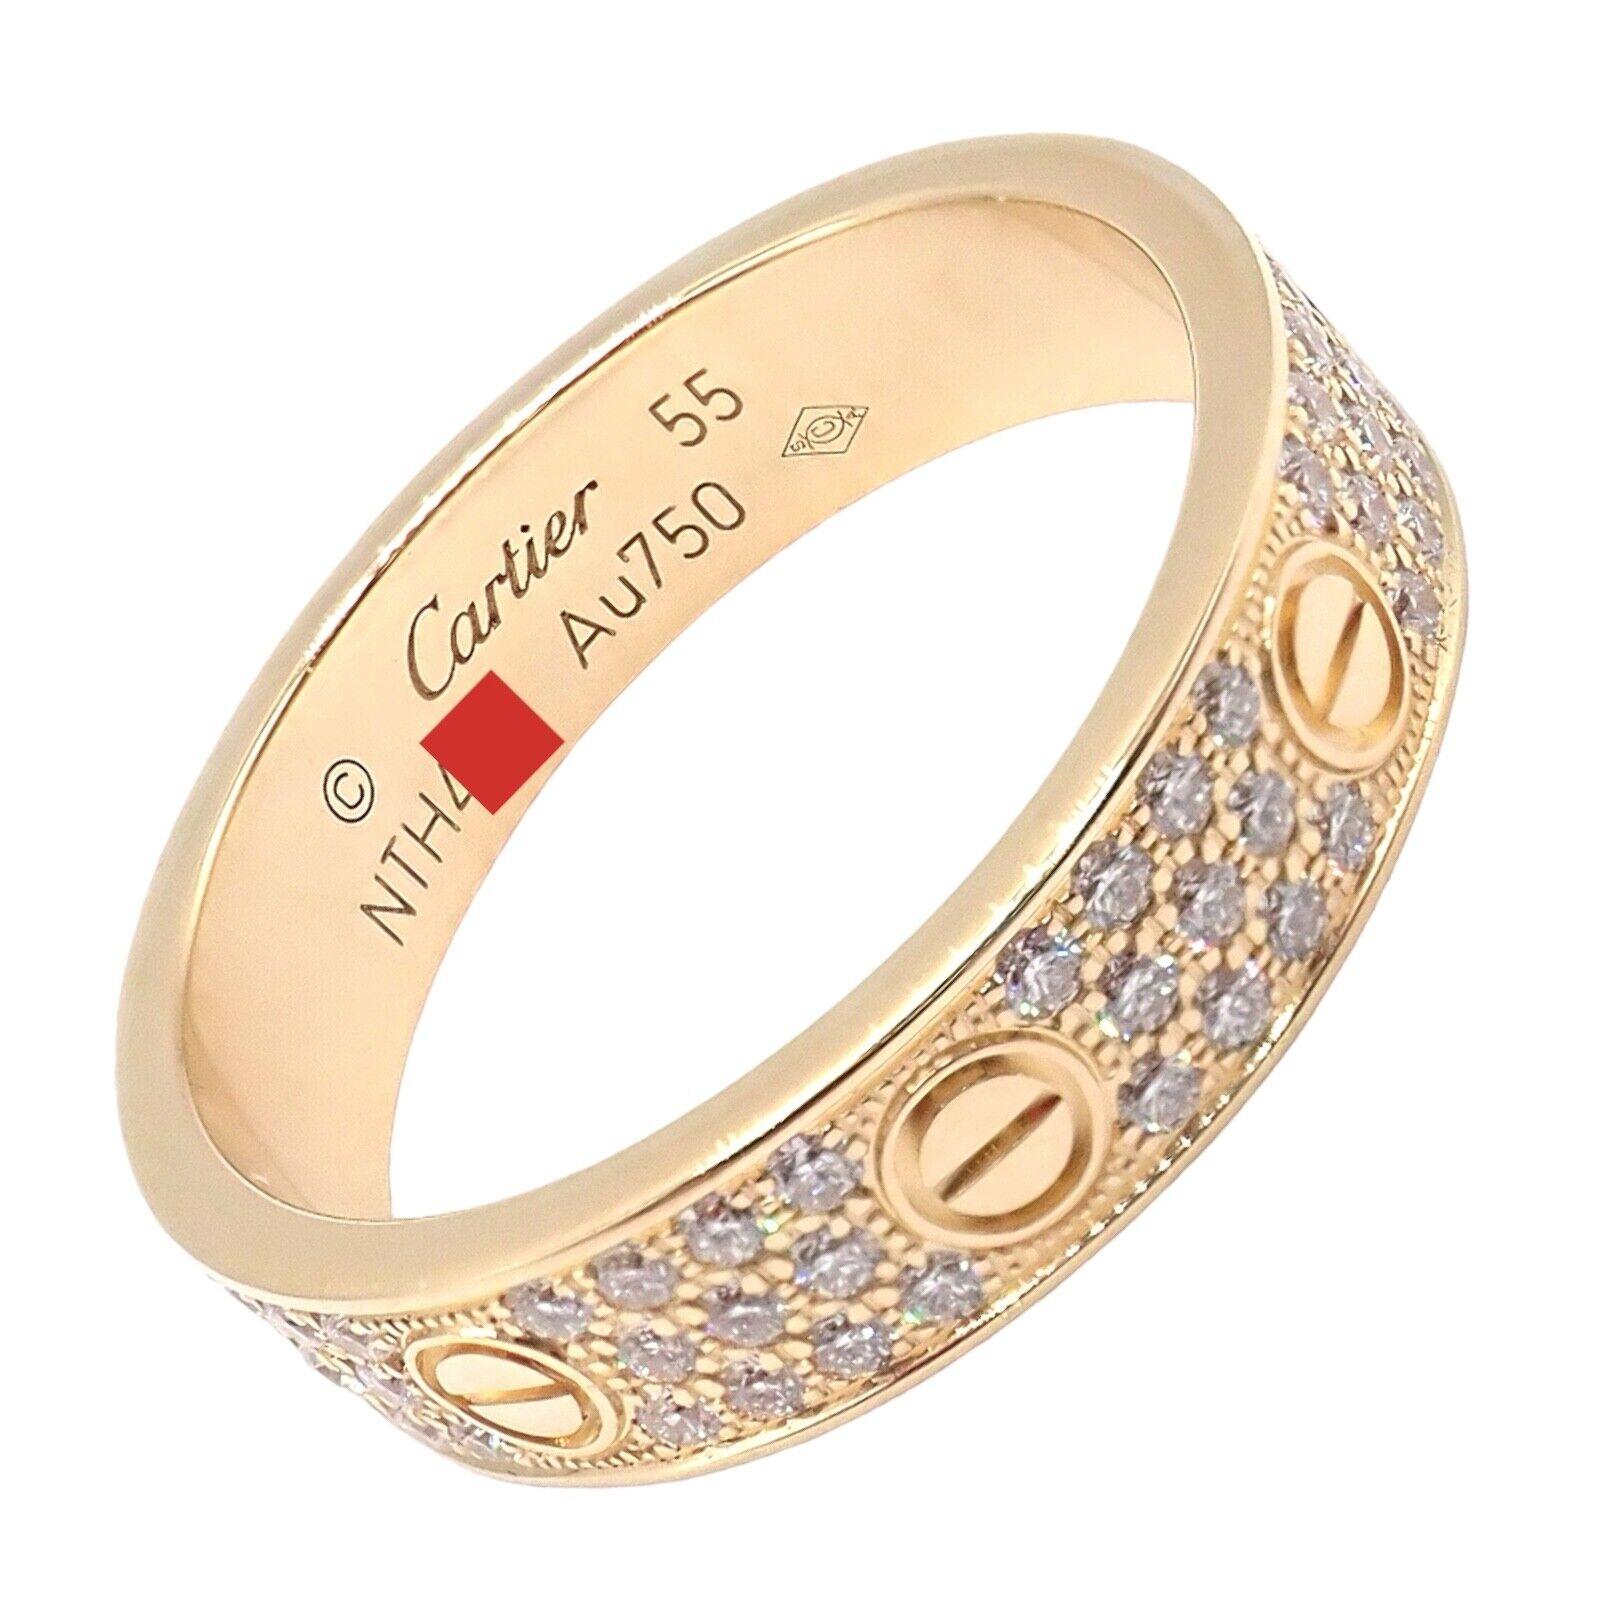 18k Yellow Gold Diamond Paved Love Band Ring by Cartier.
Experience the epitome of luxury with this Authentic Cartier Love 18k Yellow Gold Diamond Paved Ring. Sized at 7.25 (55), this stunning piece features radiant pave diamonds embedded in warm